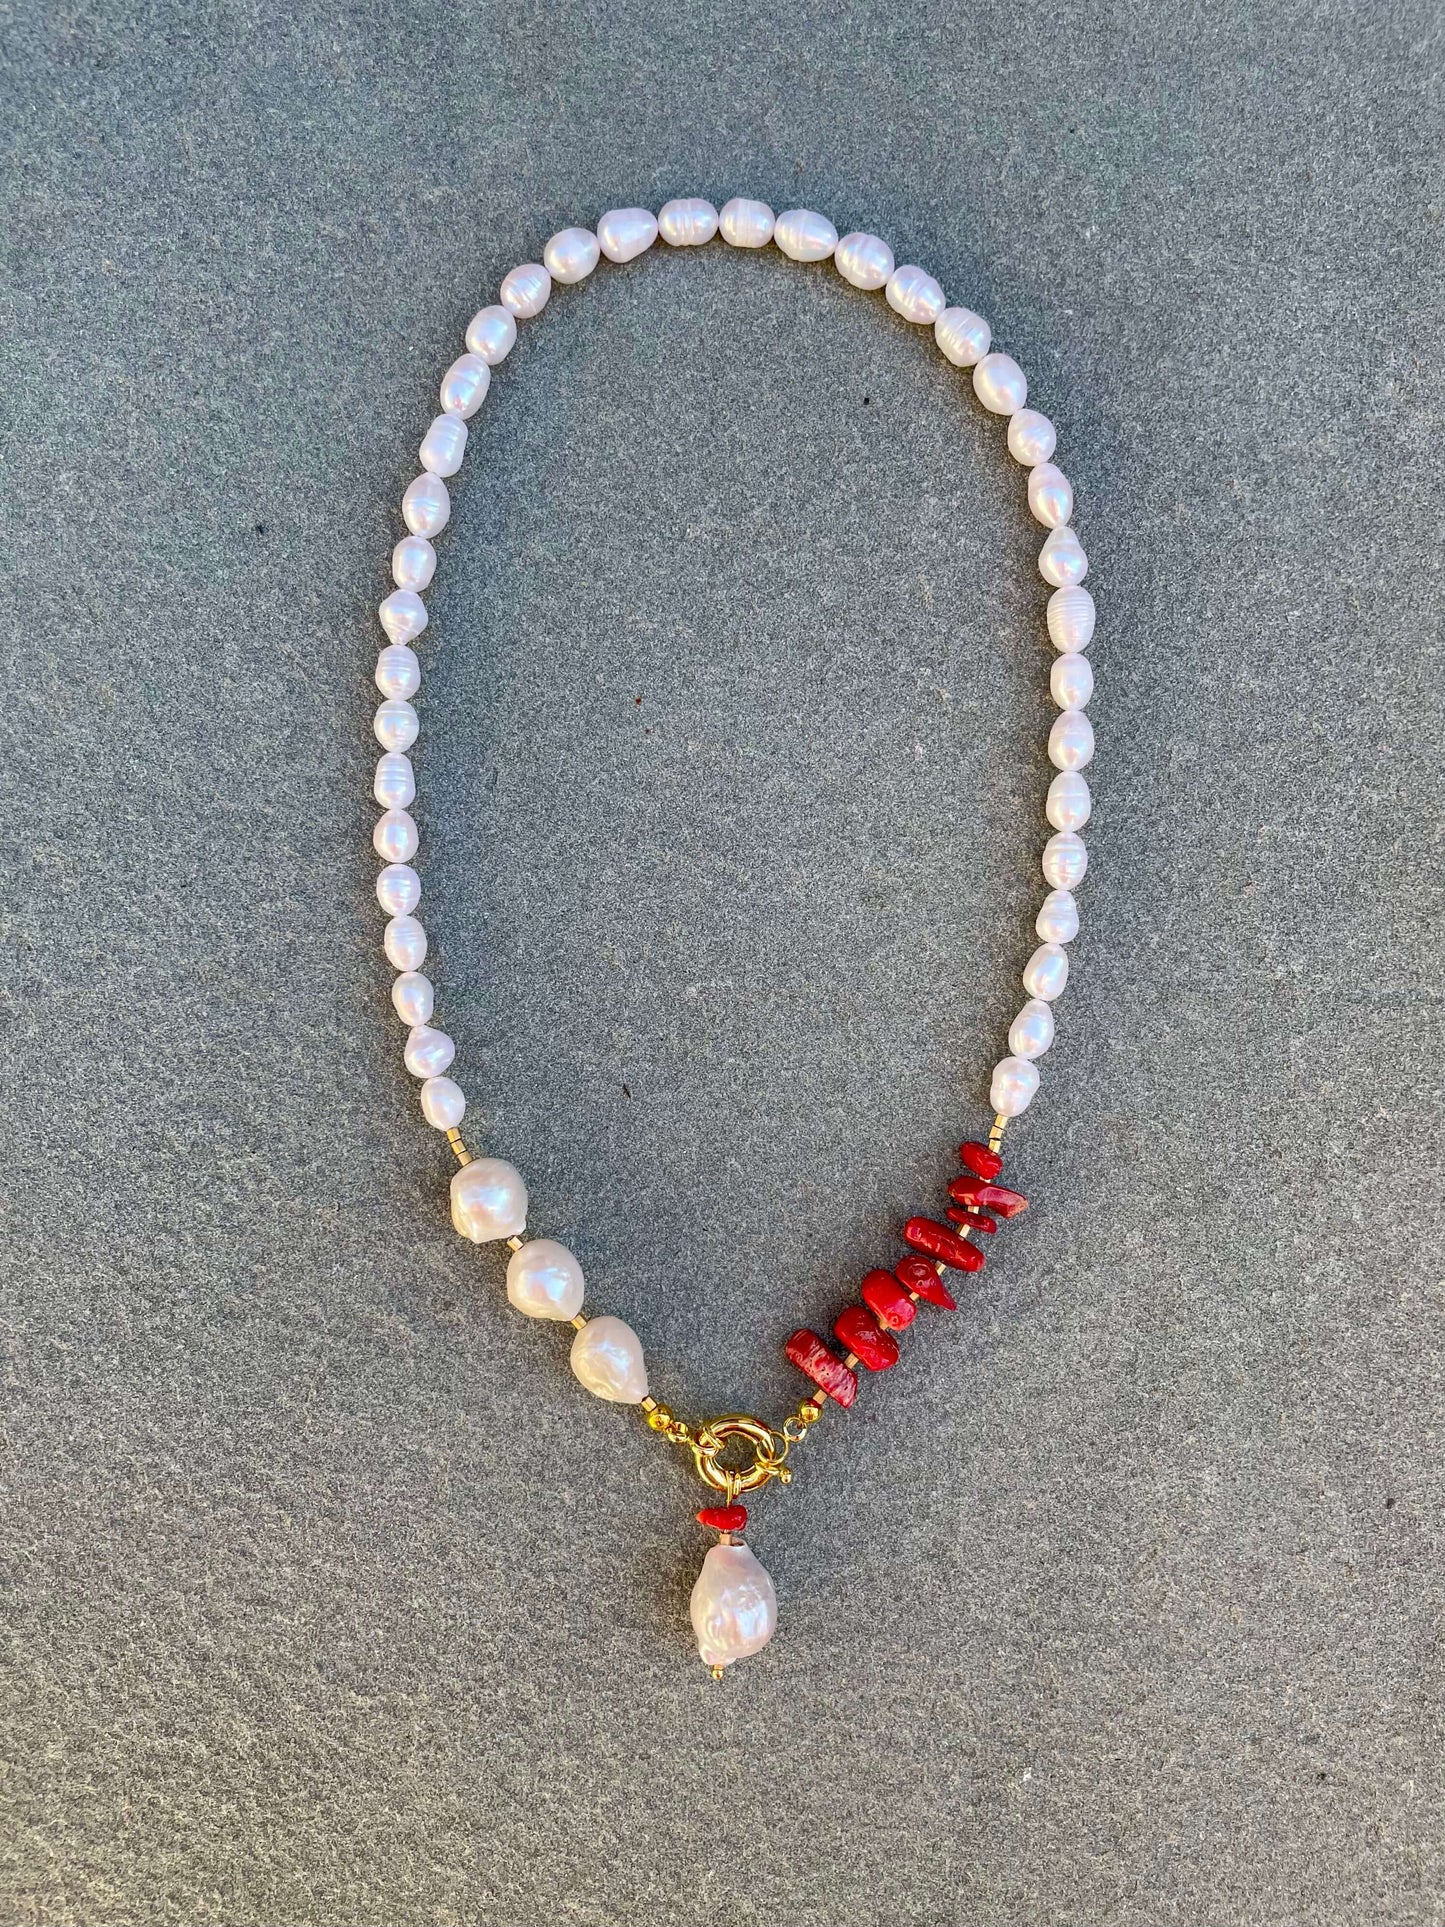 Pearl and Coral Necklace by Seyyah